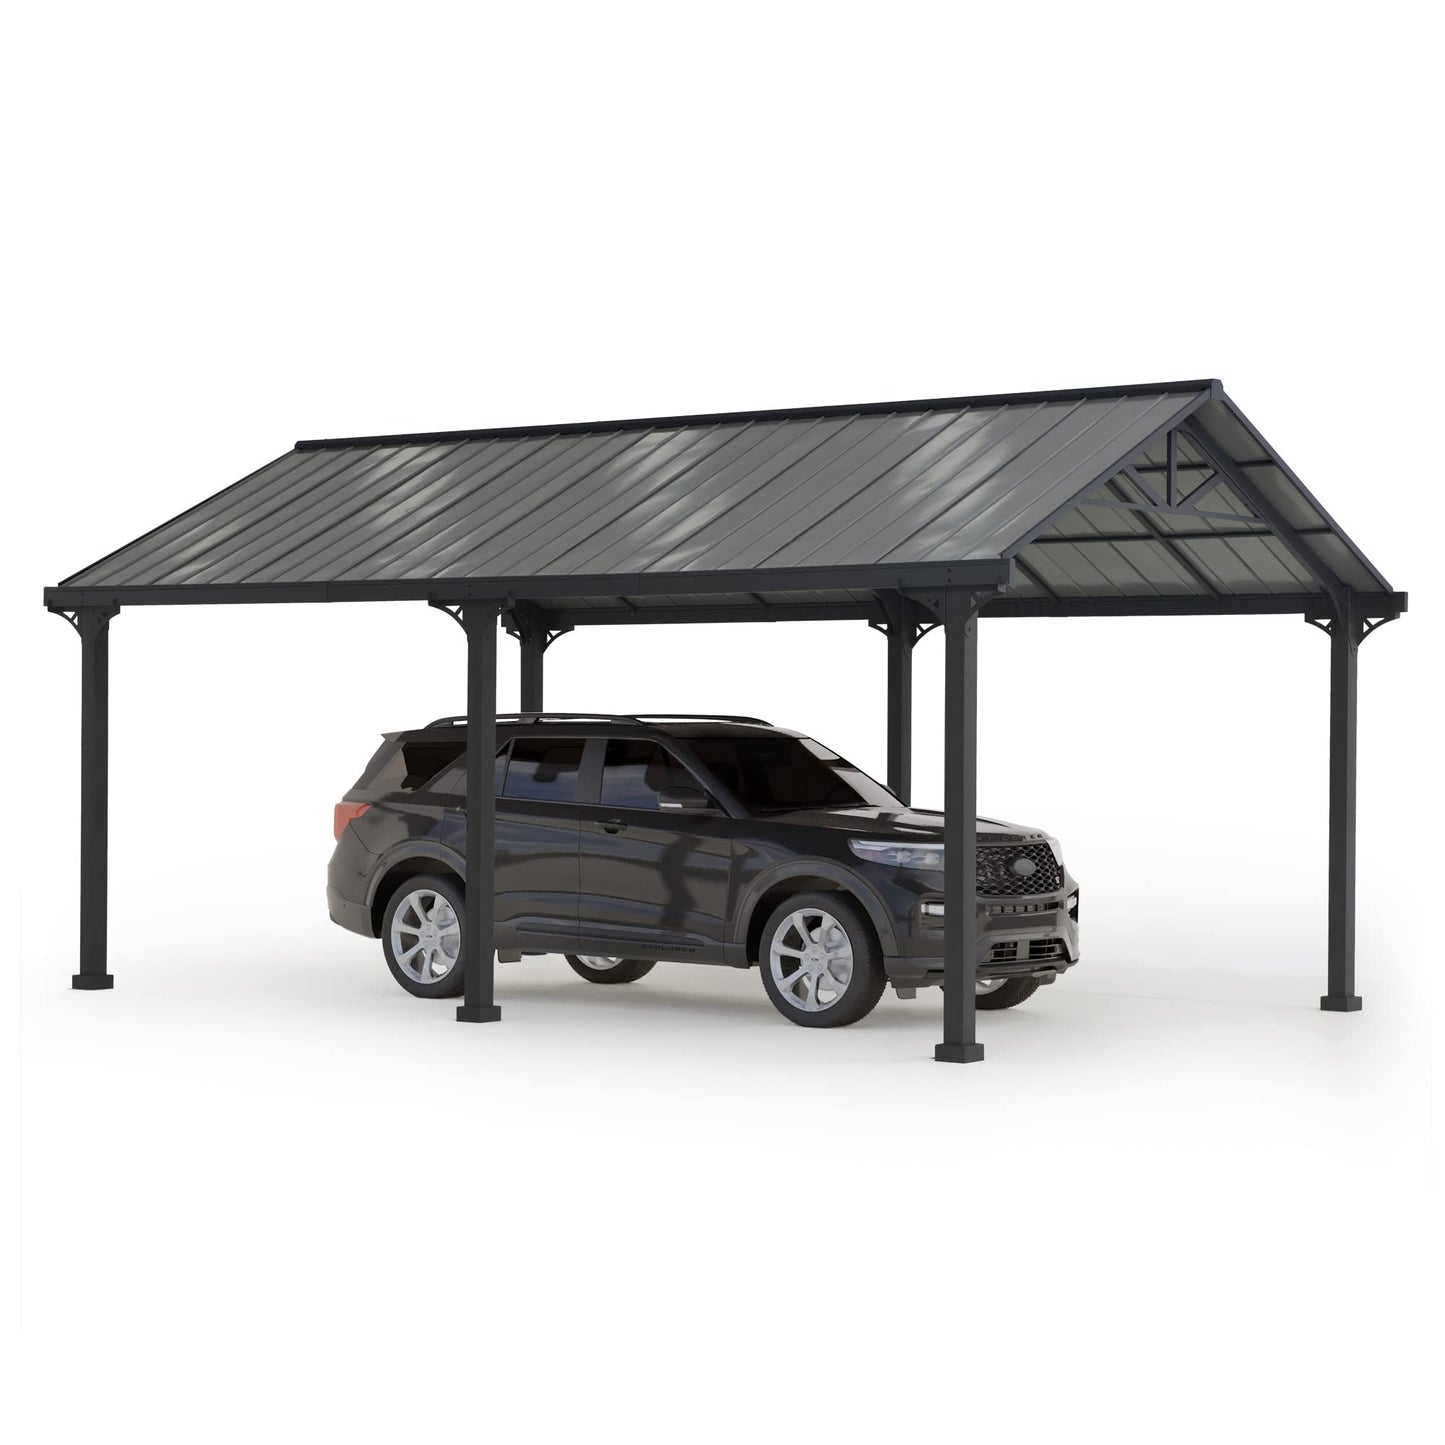 Sunjoy Carport 12 ft. x 20 ft. Outdoor Gazebo Heavy Duty Garage Car Shelter with Powder-Coated Steel Roof and Frame by AutoCove, Gray and Dark Gray Gray/Dark Gray 12 x 20 ft.